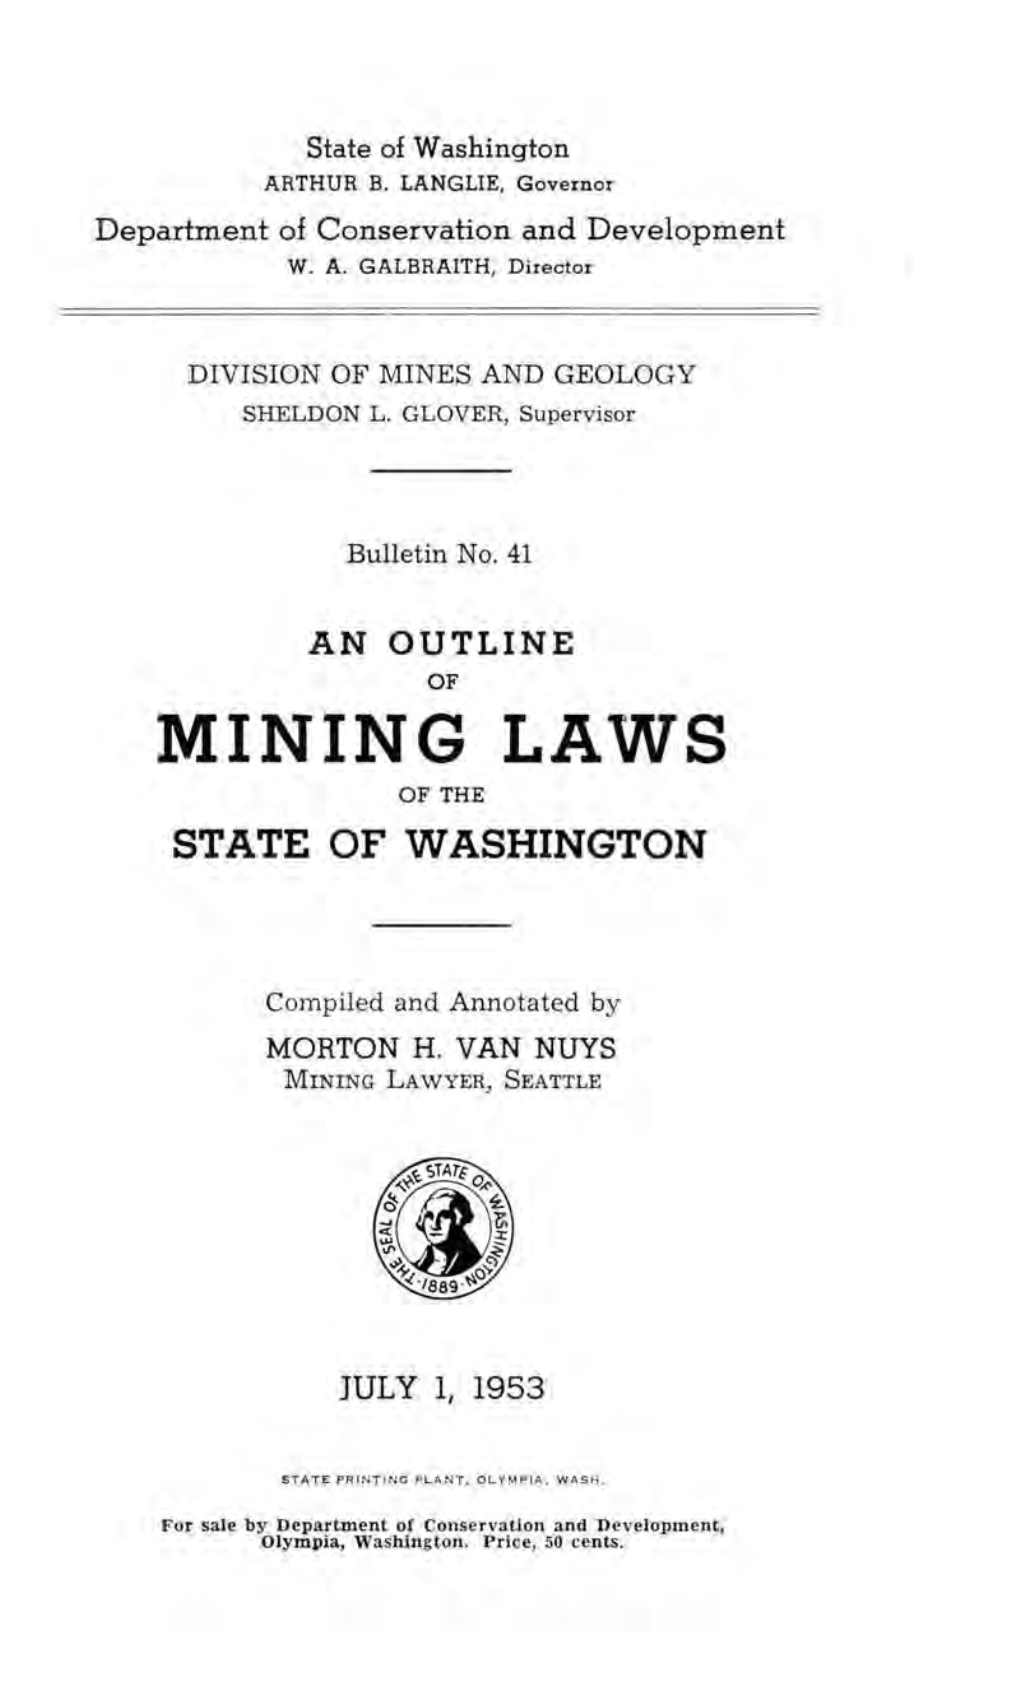 Mining Laws of the State of Washington